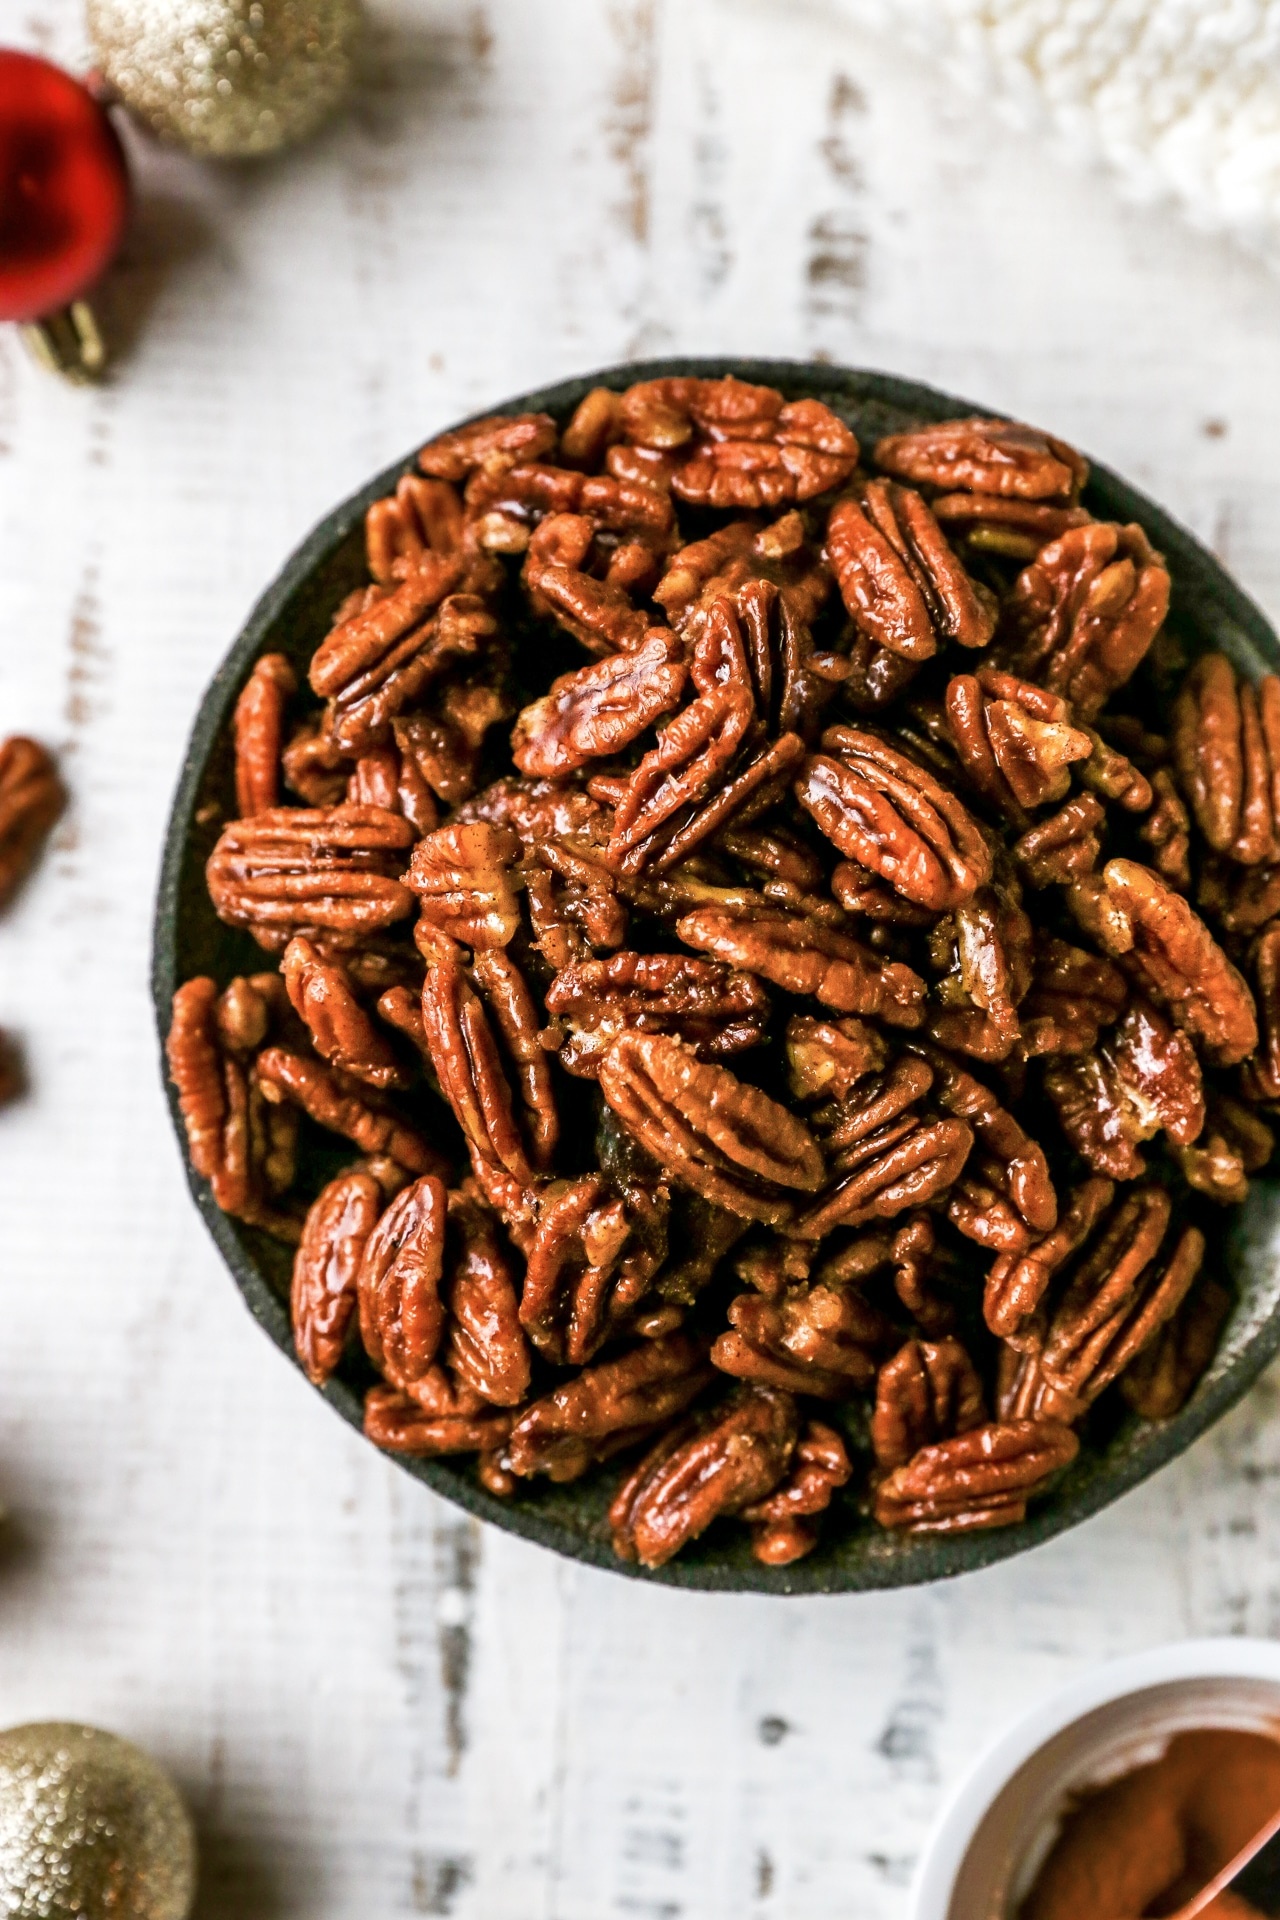 Pecans: Hickory nuts, One of the most recently domesticated major crops. 1280x1920 HD Background.